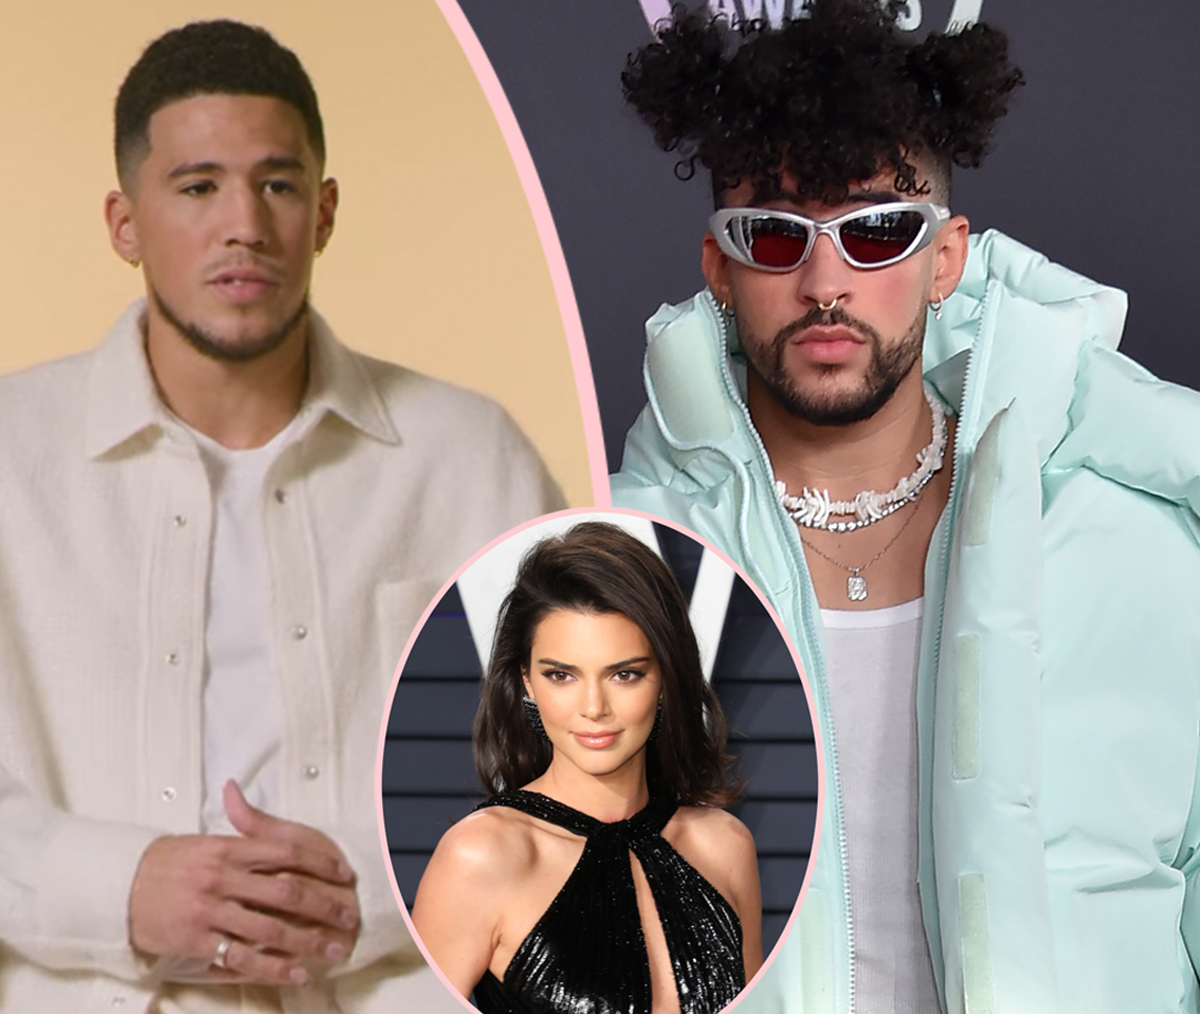 Bad Bunny Seemingly Throws Shade At Kendall Jenner’s Ex Devin